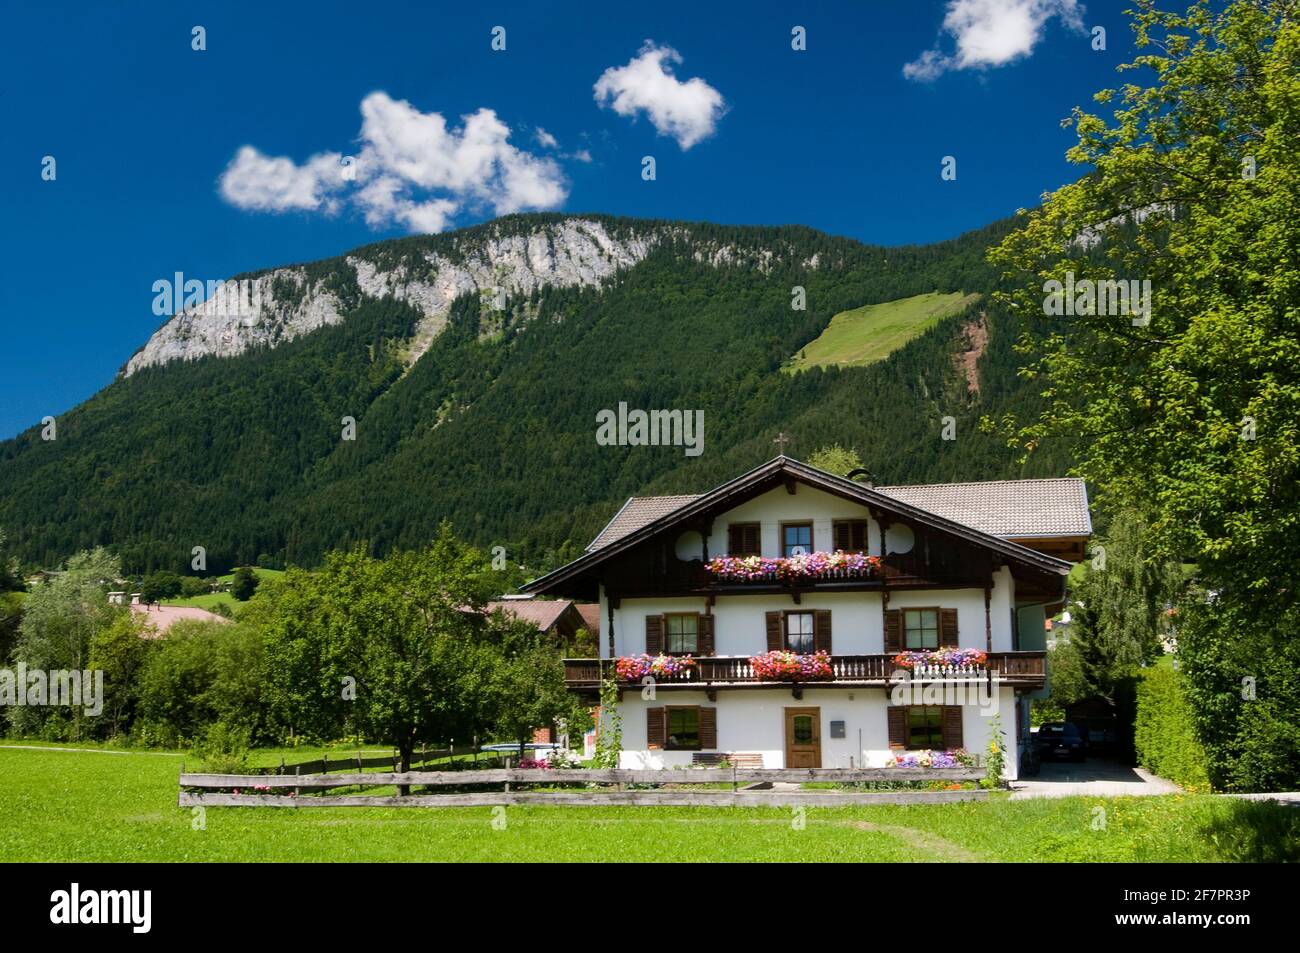 Beautiful Tyrolean House In The Village Of Soll In Austria Stock Photo